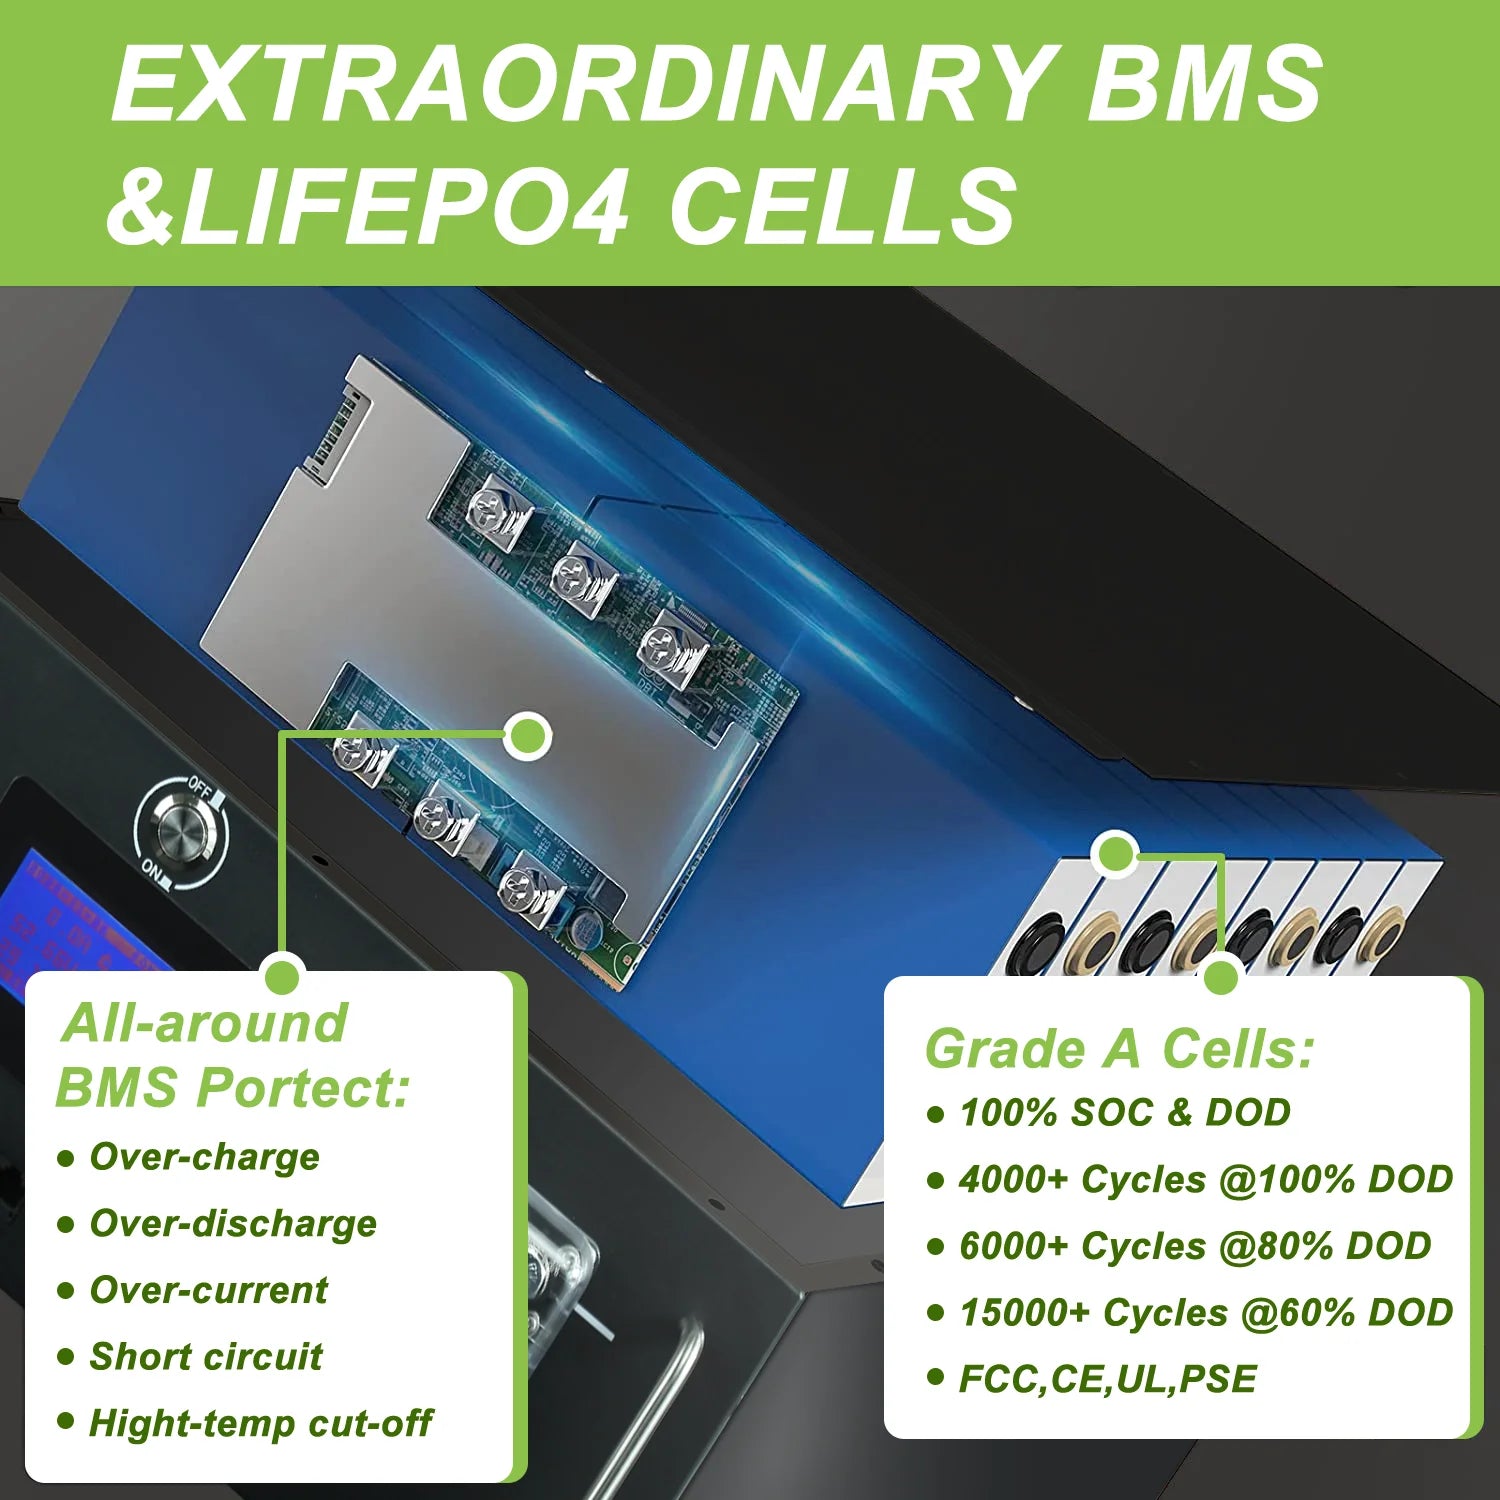 High-quality LiFePO4 cells and BMS ensure excellent battery performance.